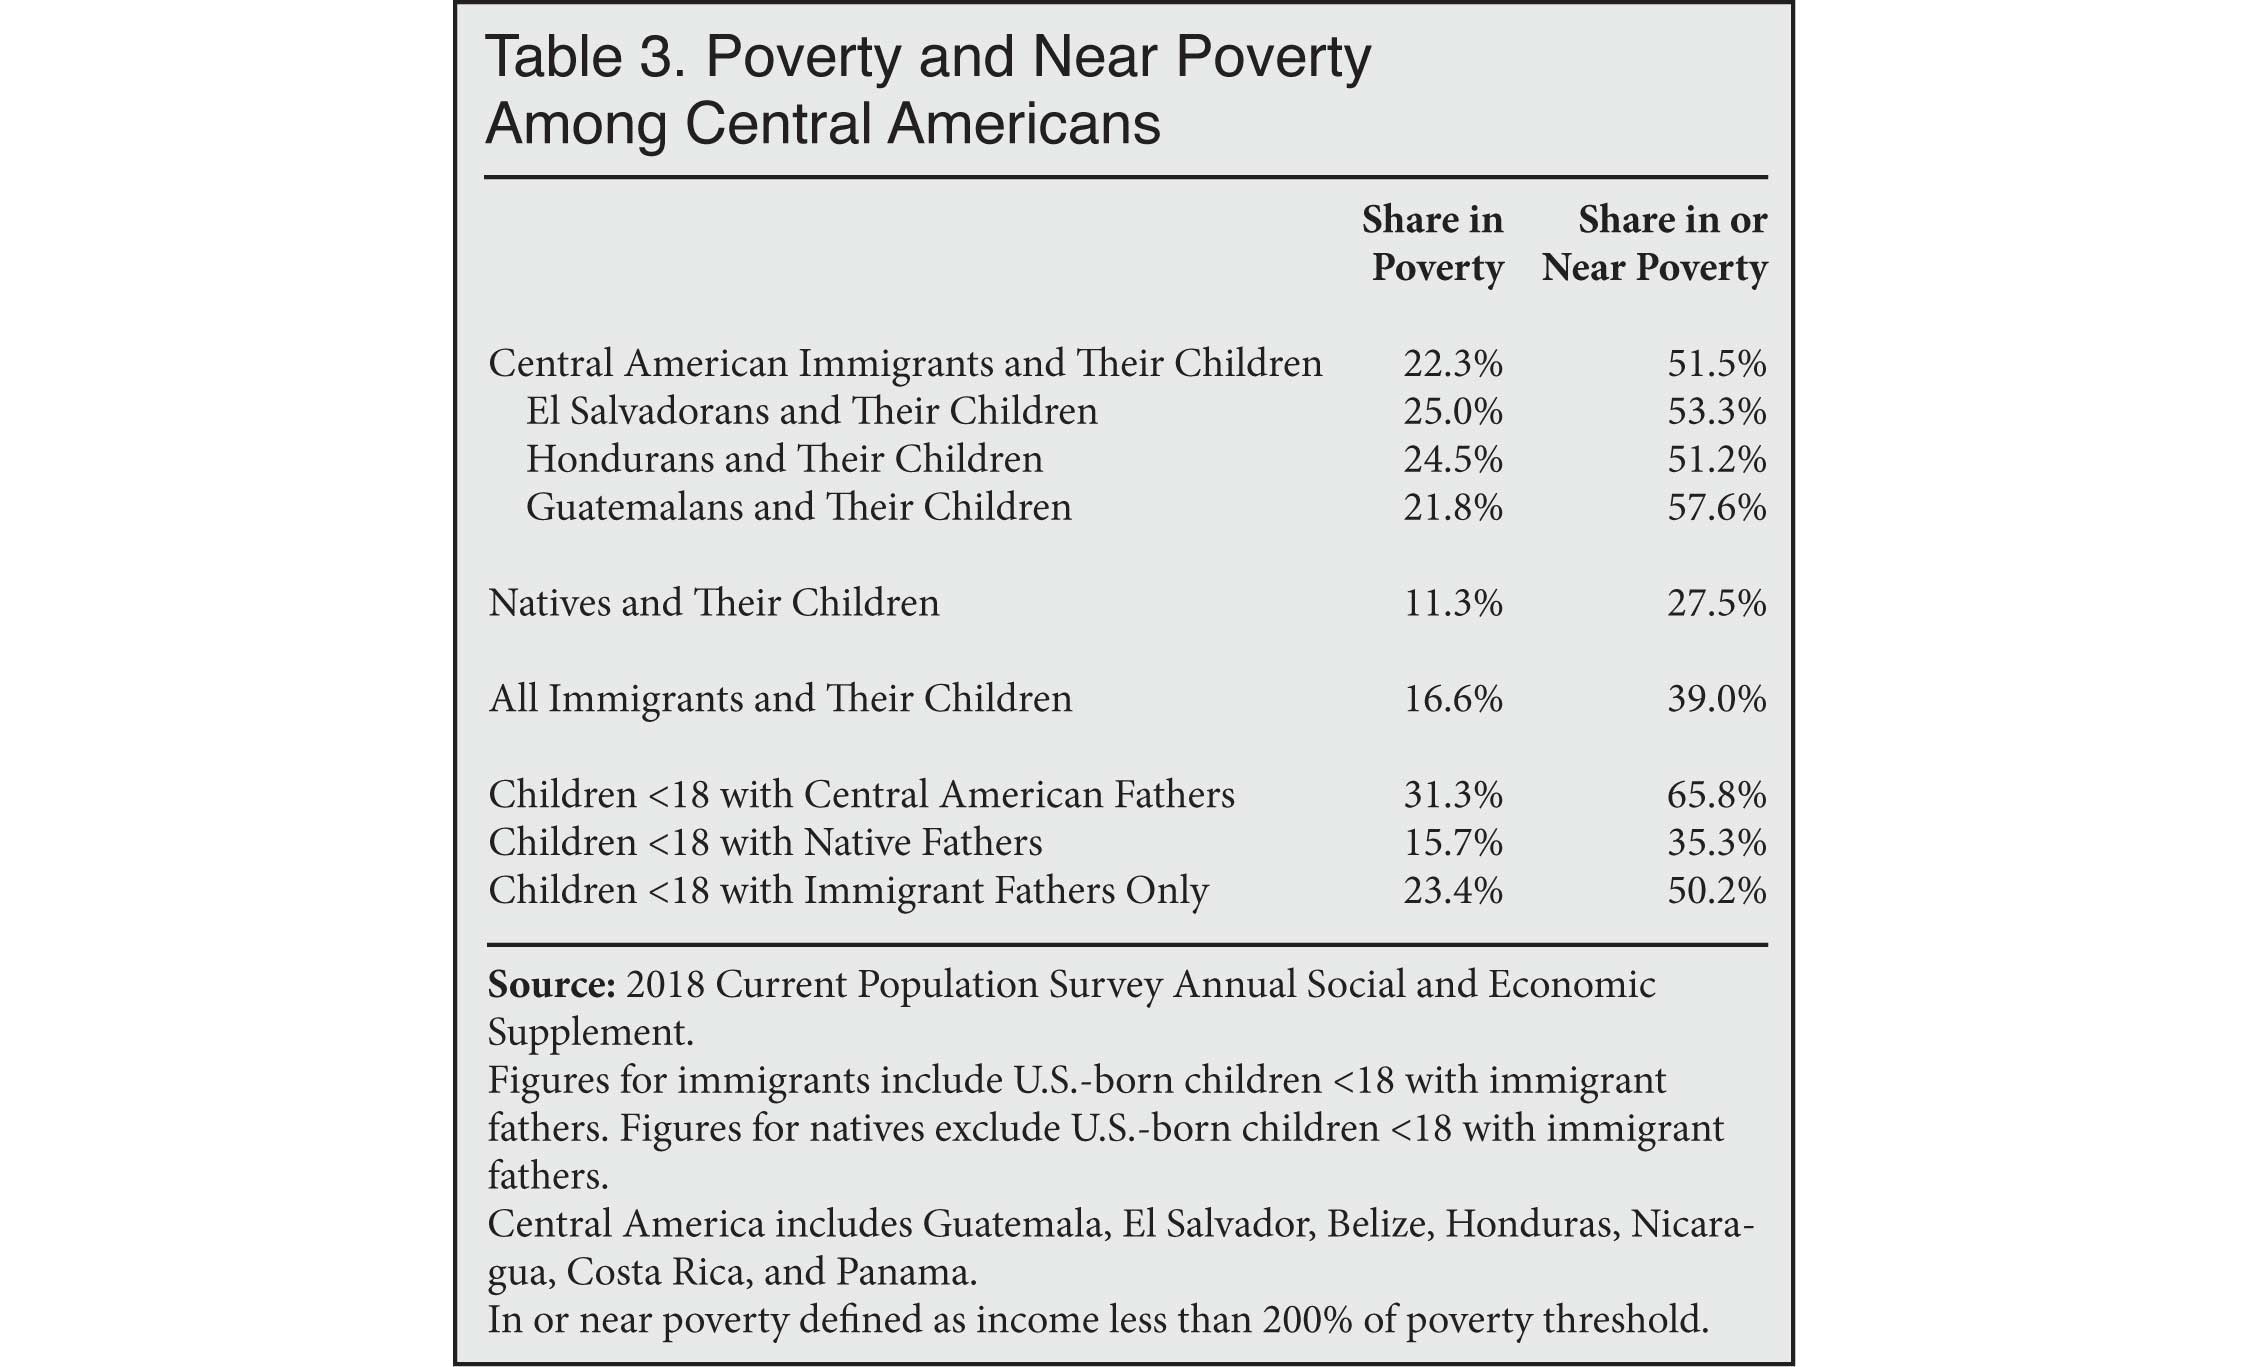 Table: Poverty and Near Poverty Among Central Americans